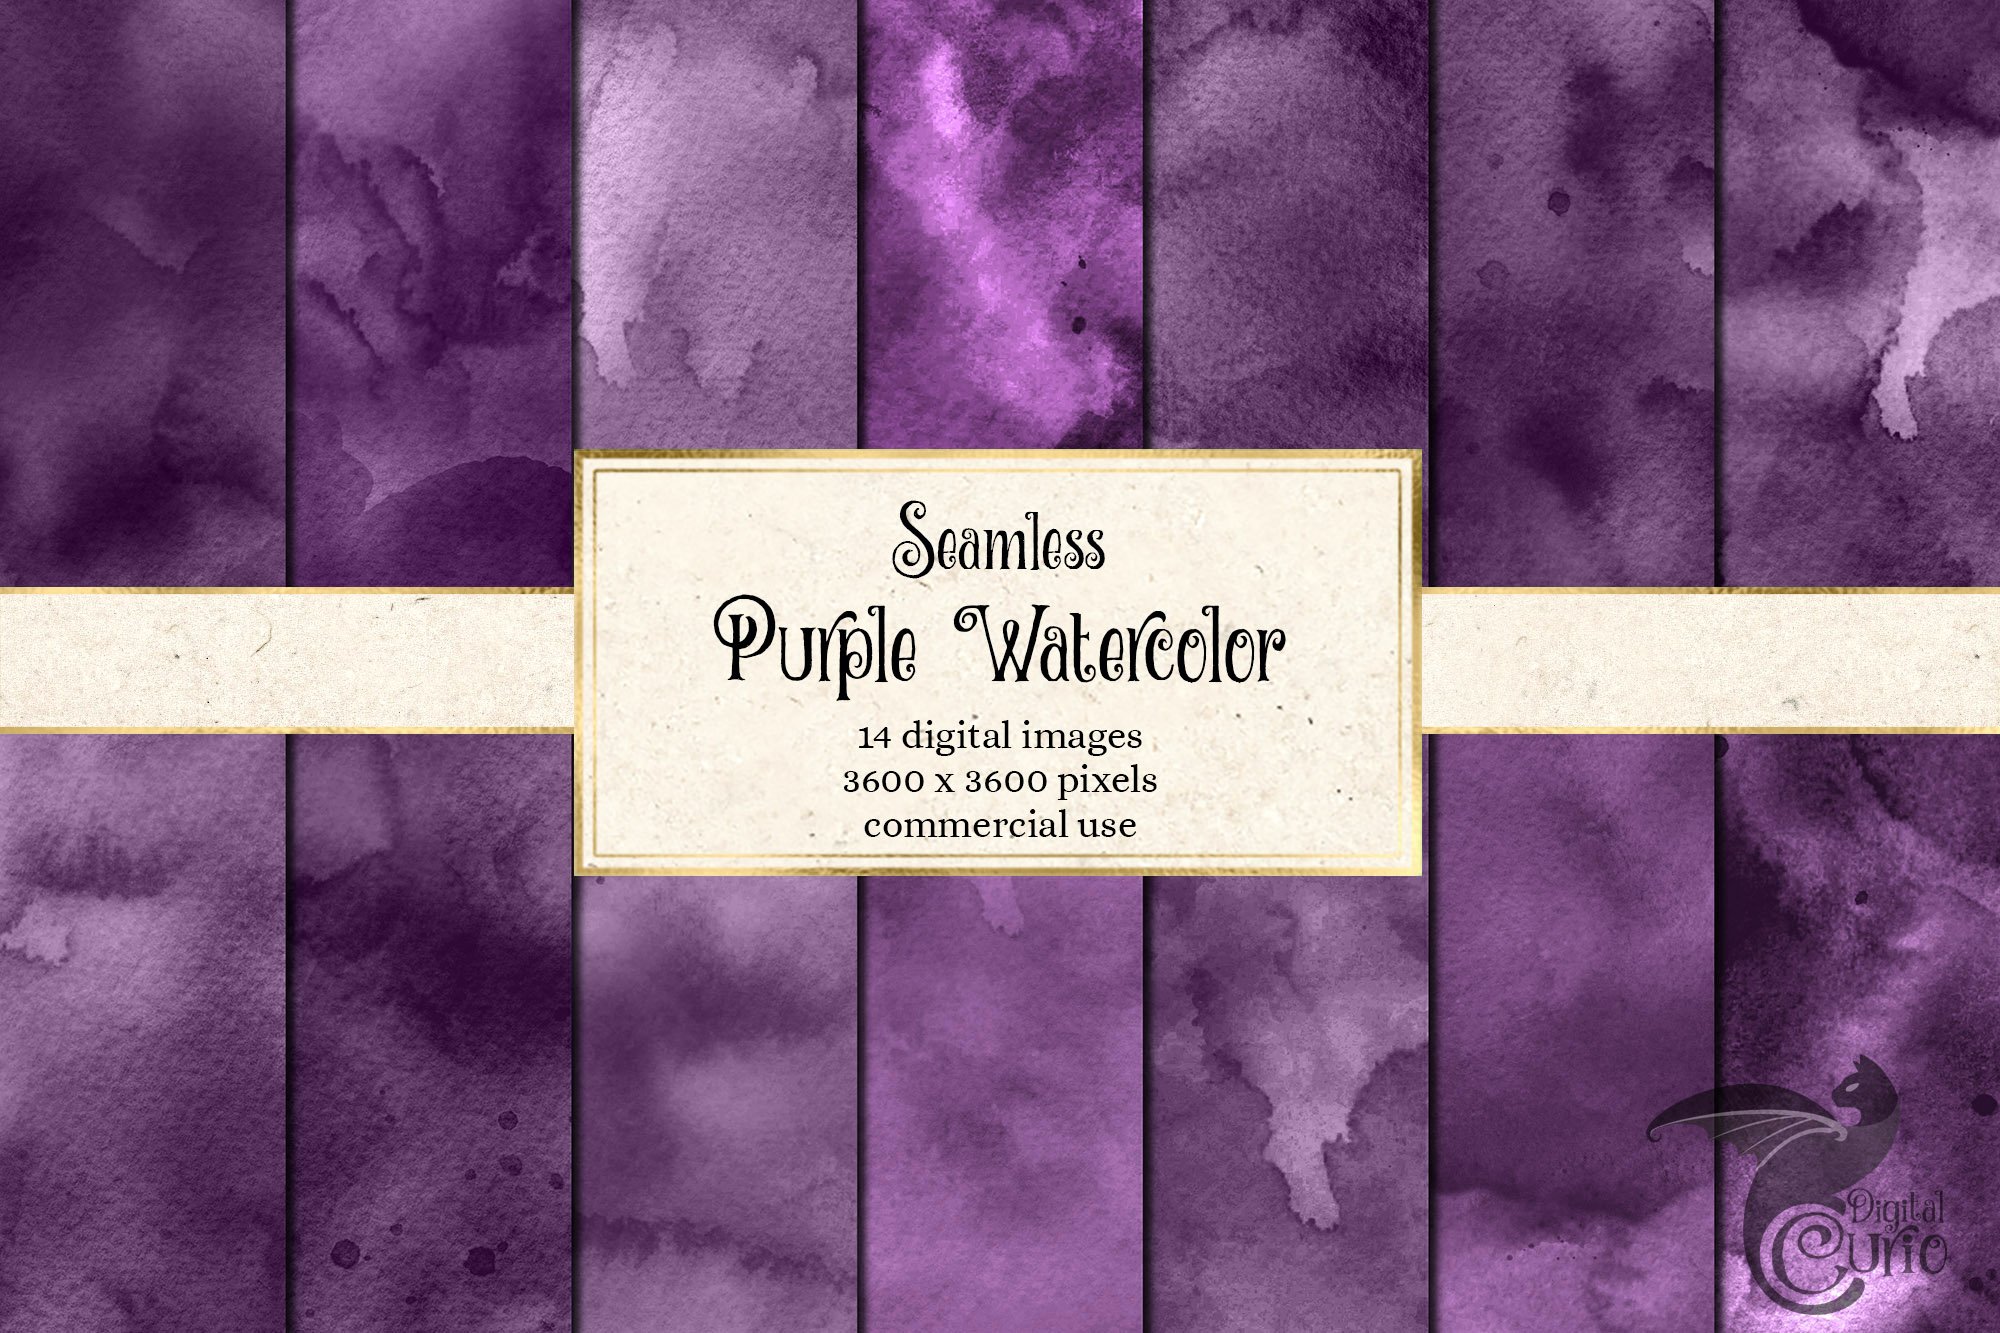 Seamless Purple Watercolor Textures cover image.